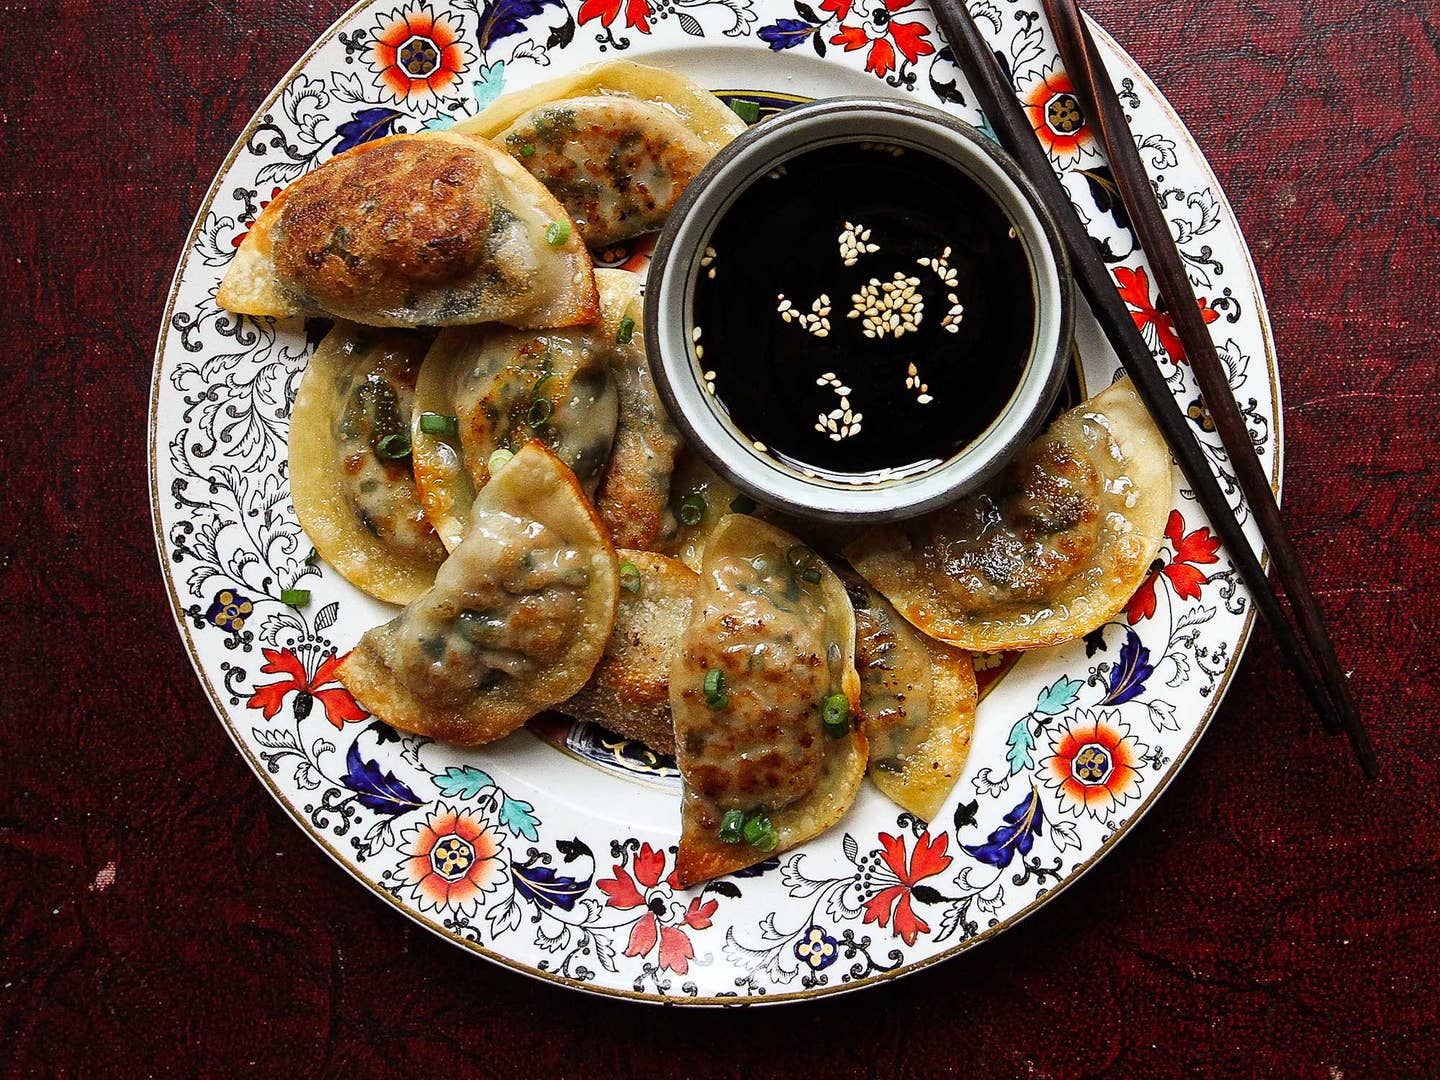 The Easiest Way to Make Potstickers at Home